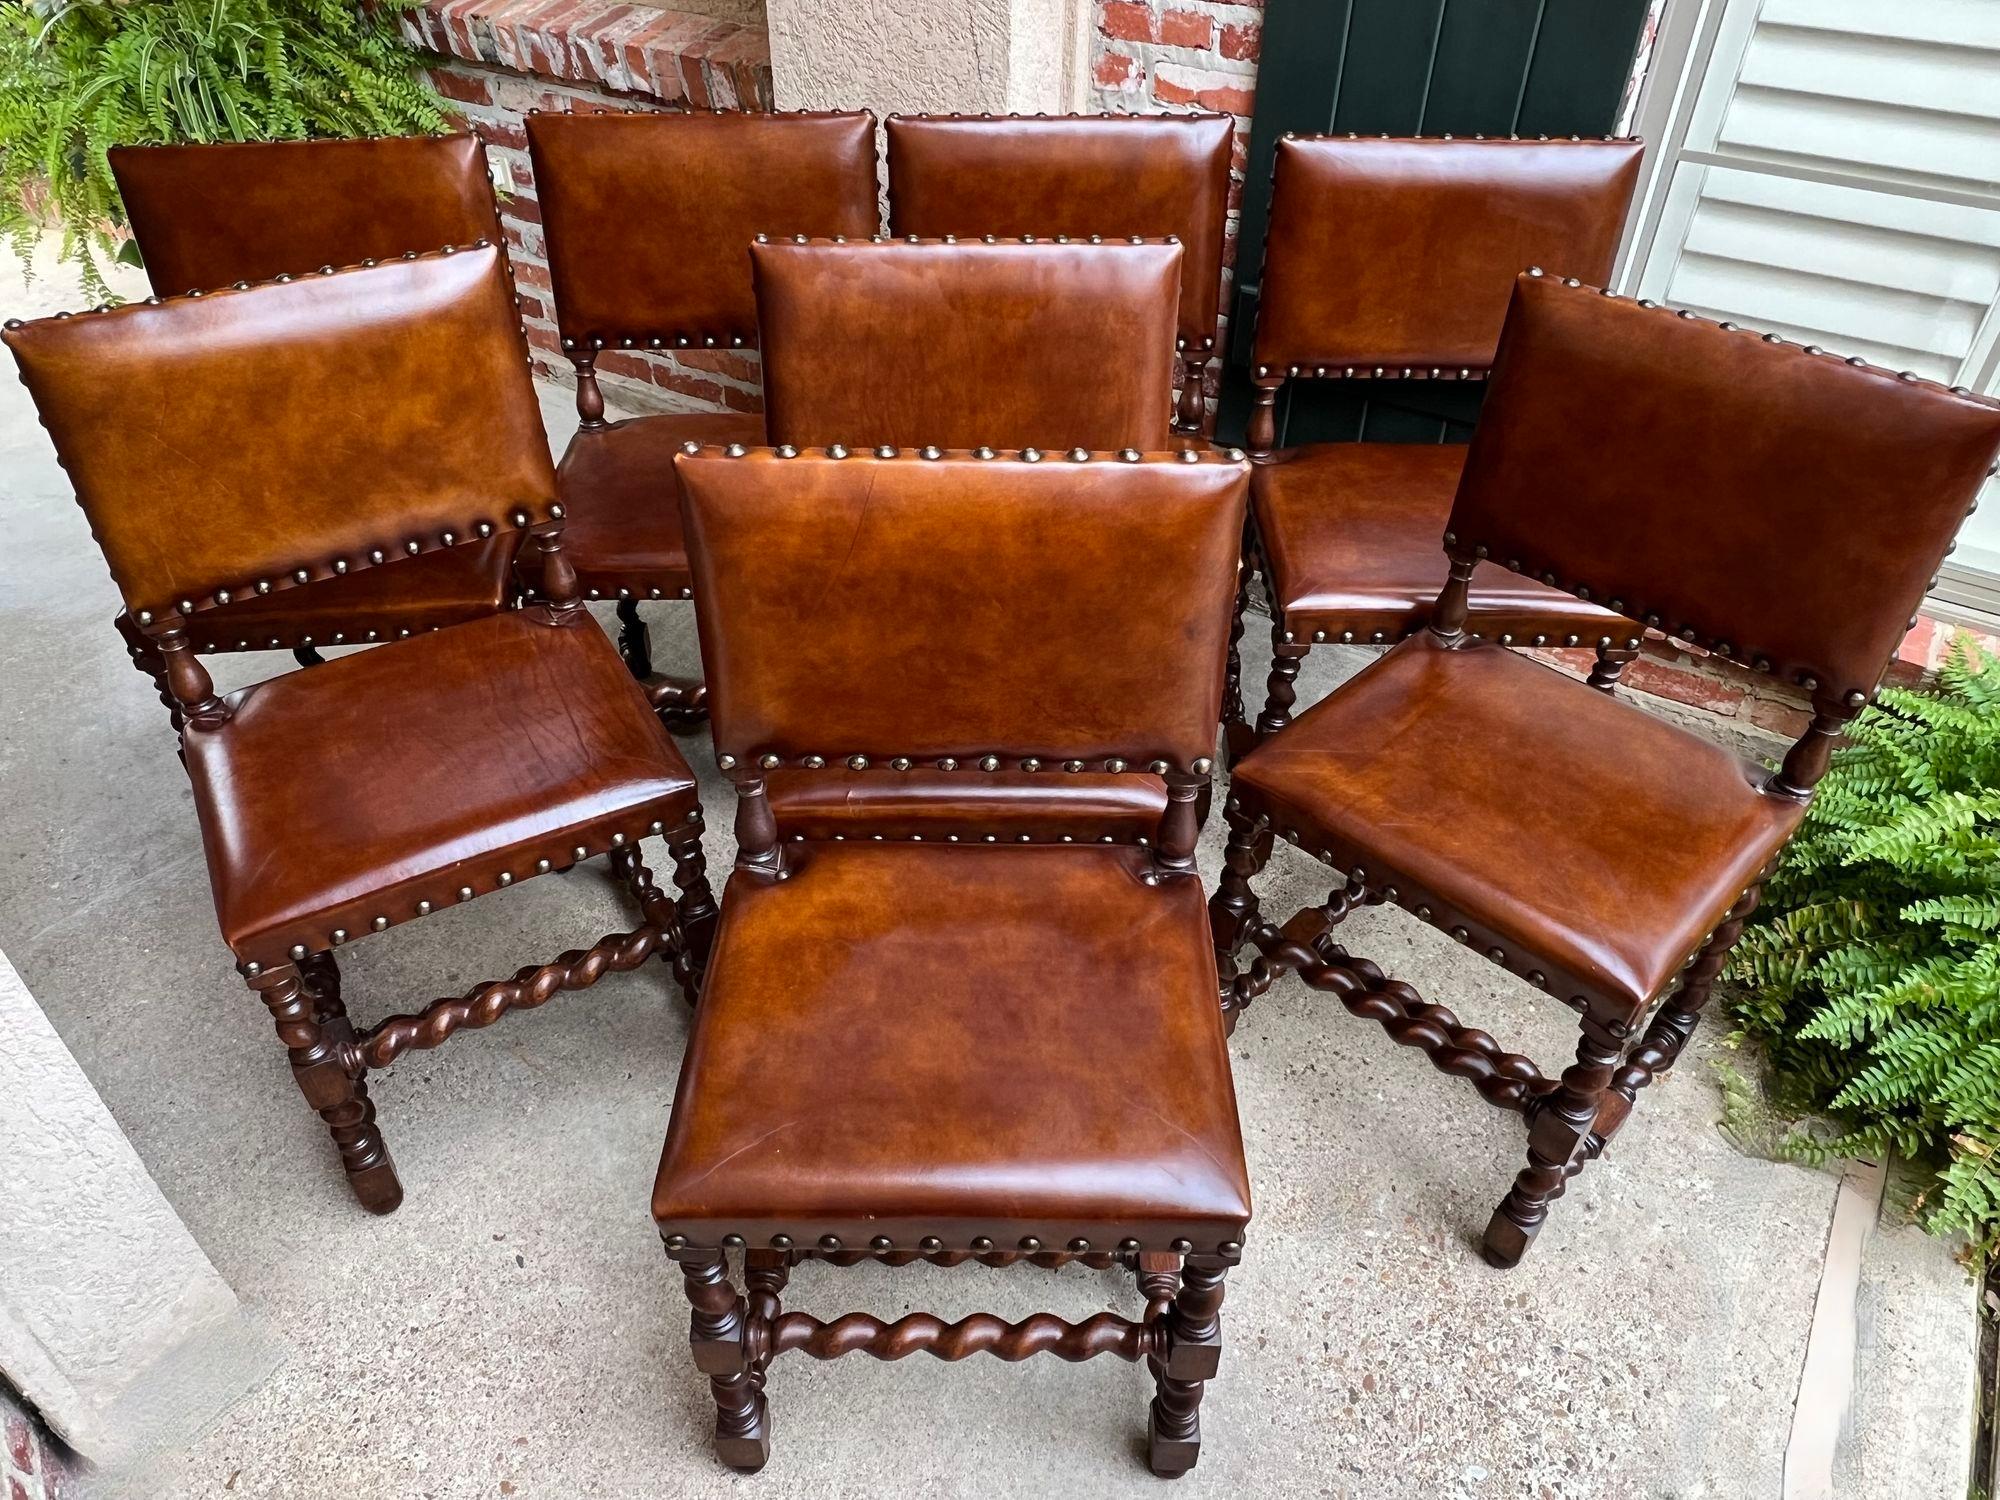 Set 8 Antique English Barley Twist Dining Chairs Oak Brass Brown Leather.

Direct from England, a beautiful set of EIGHT (8) antique English oak dining or side chairs!
Gorgeous English barley twist legs, both front and back, as well as barley twist